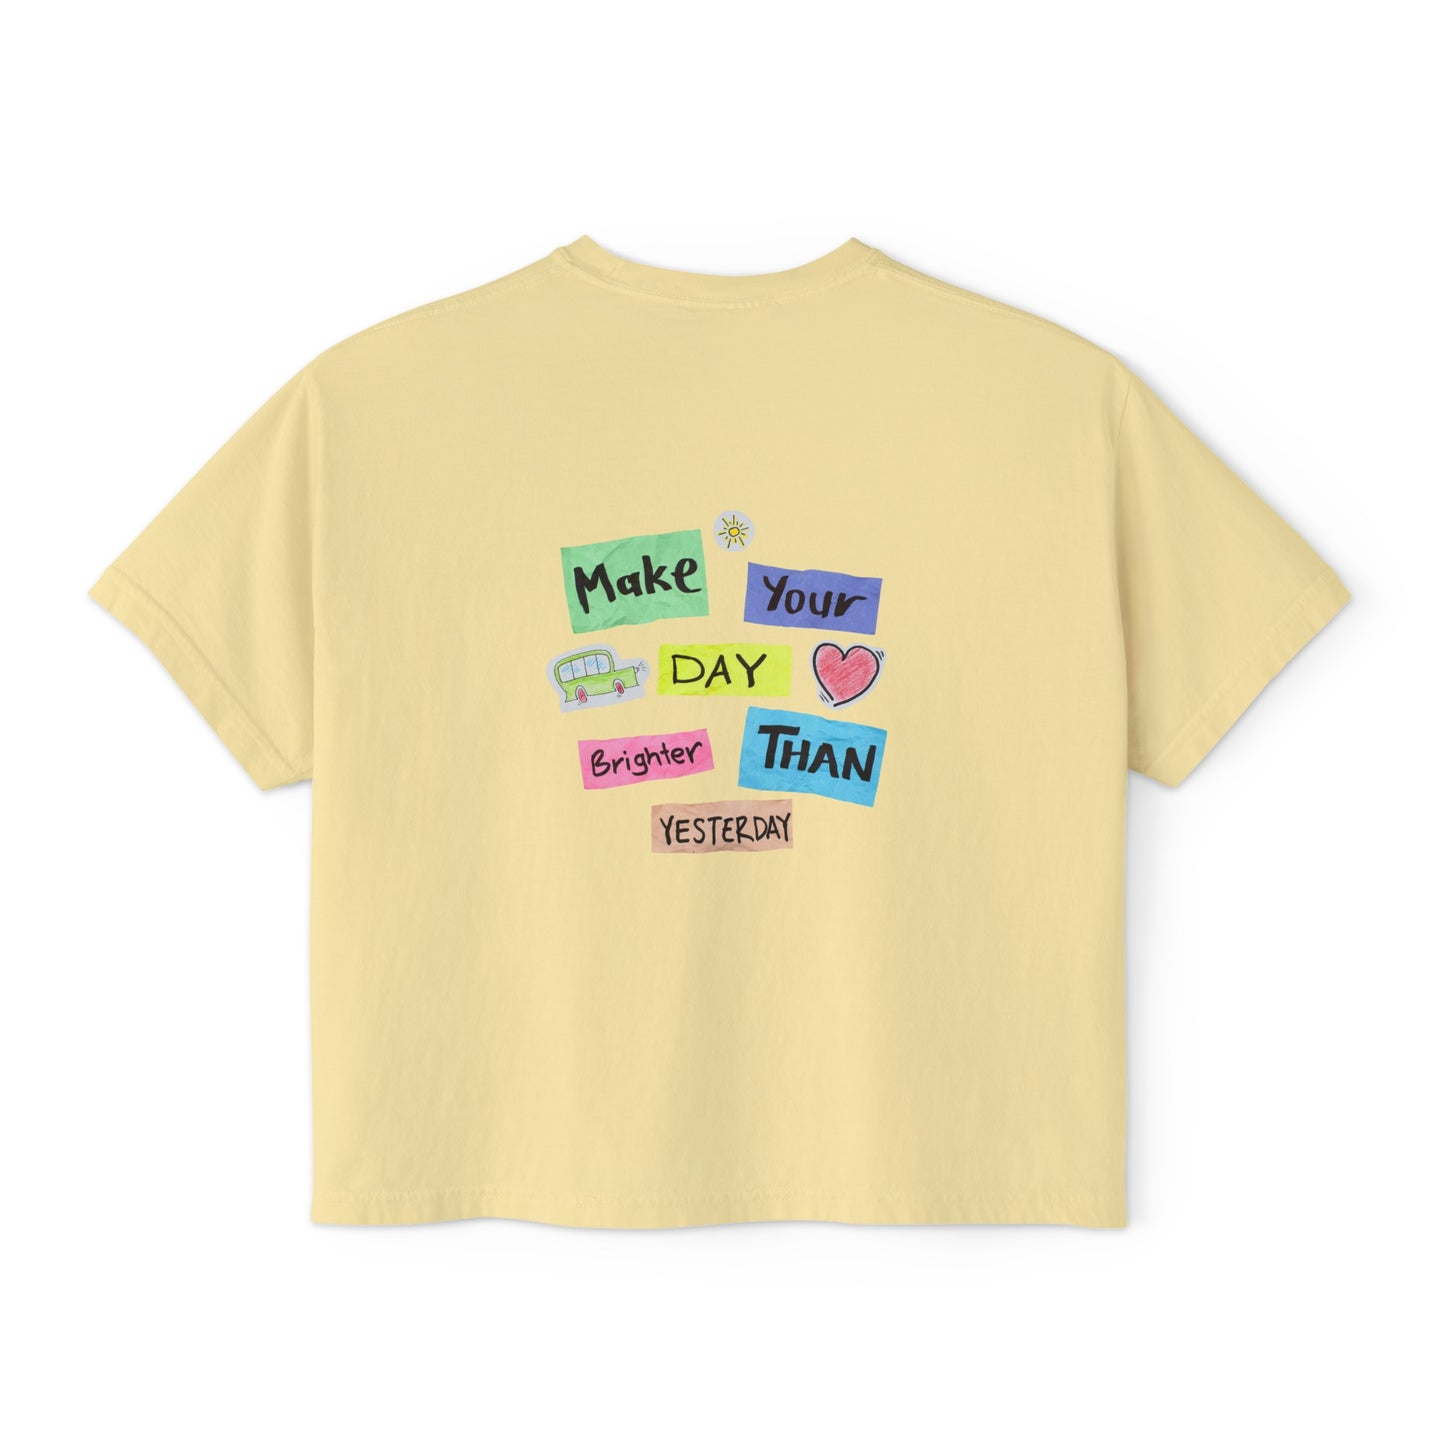 Women's Boxy Tee with Back Print - Make Your Day Brighter Than Yesterday